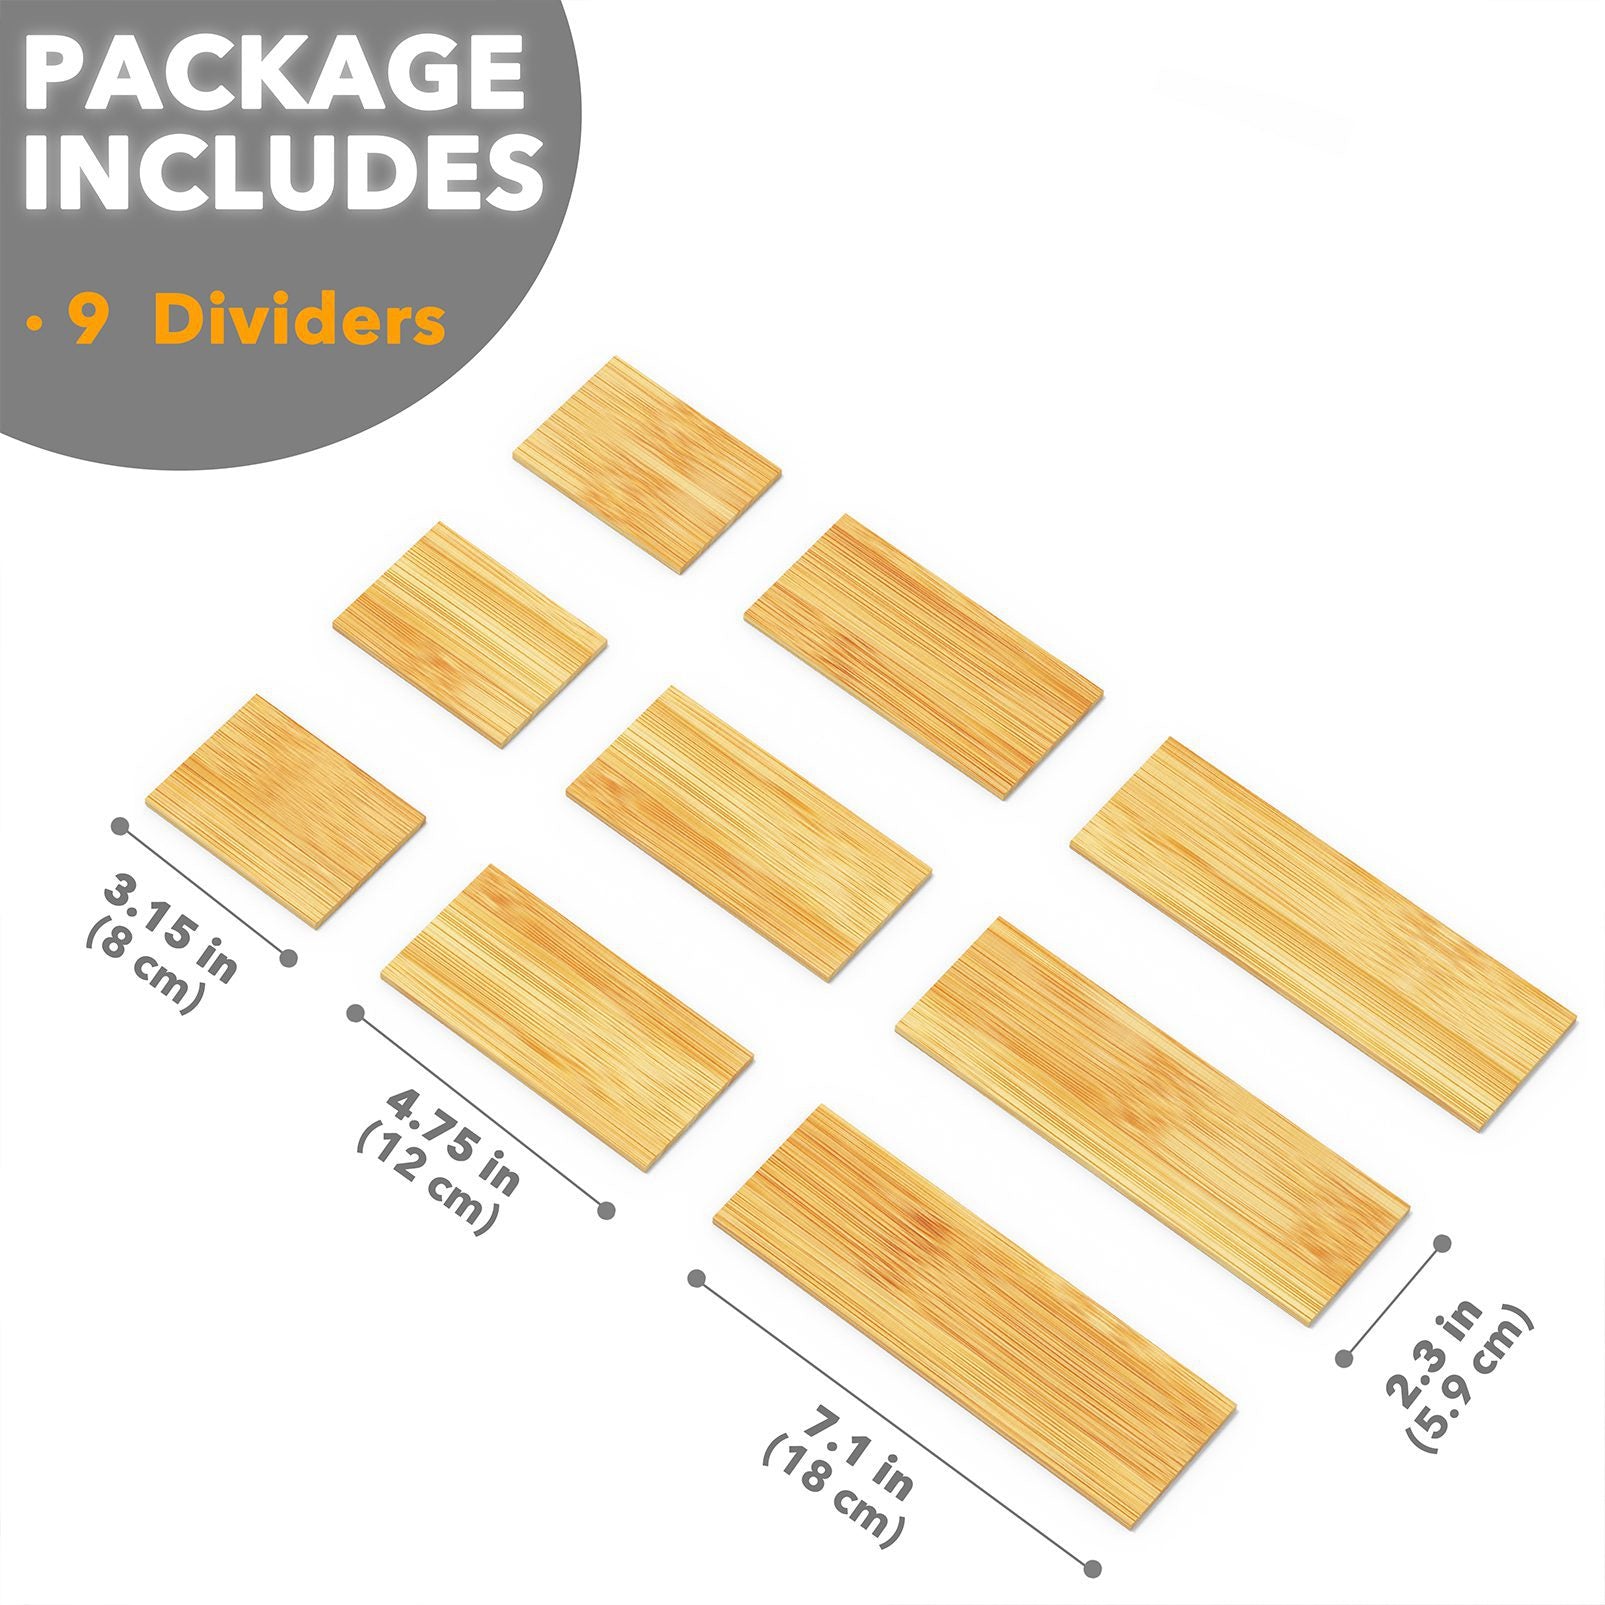 bamboo drawer divider inserts